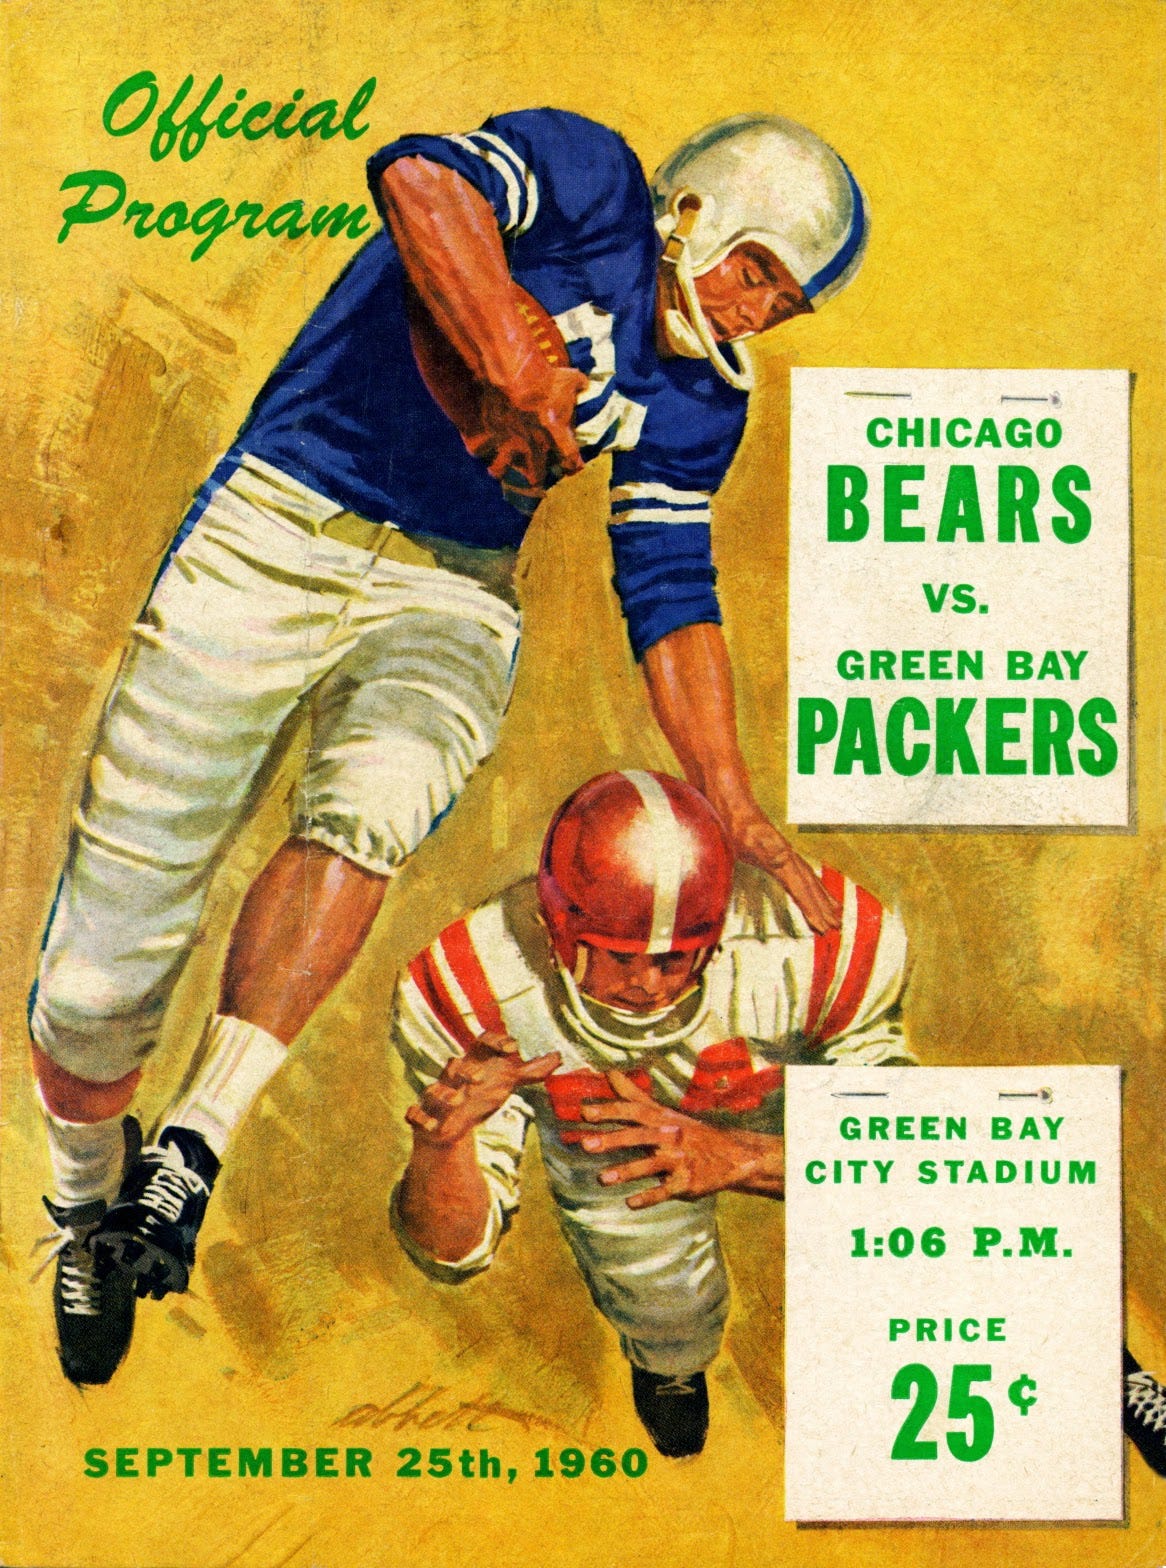 PACKERVILLE, U.S.A.: Packers vs. Bears 1960